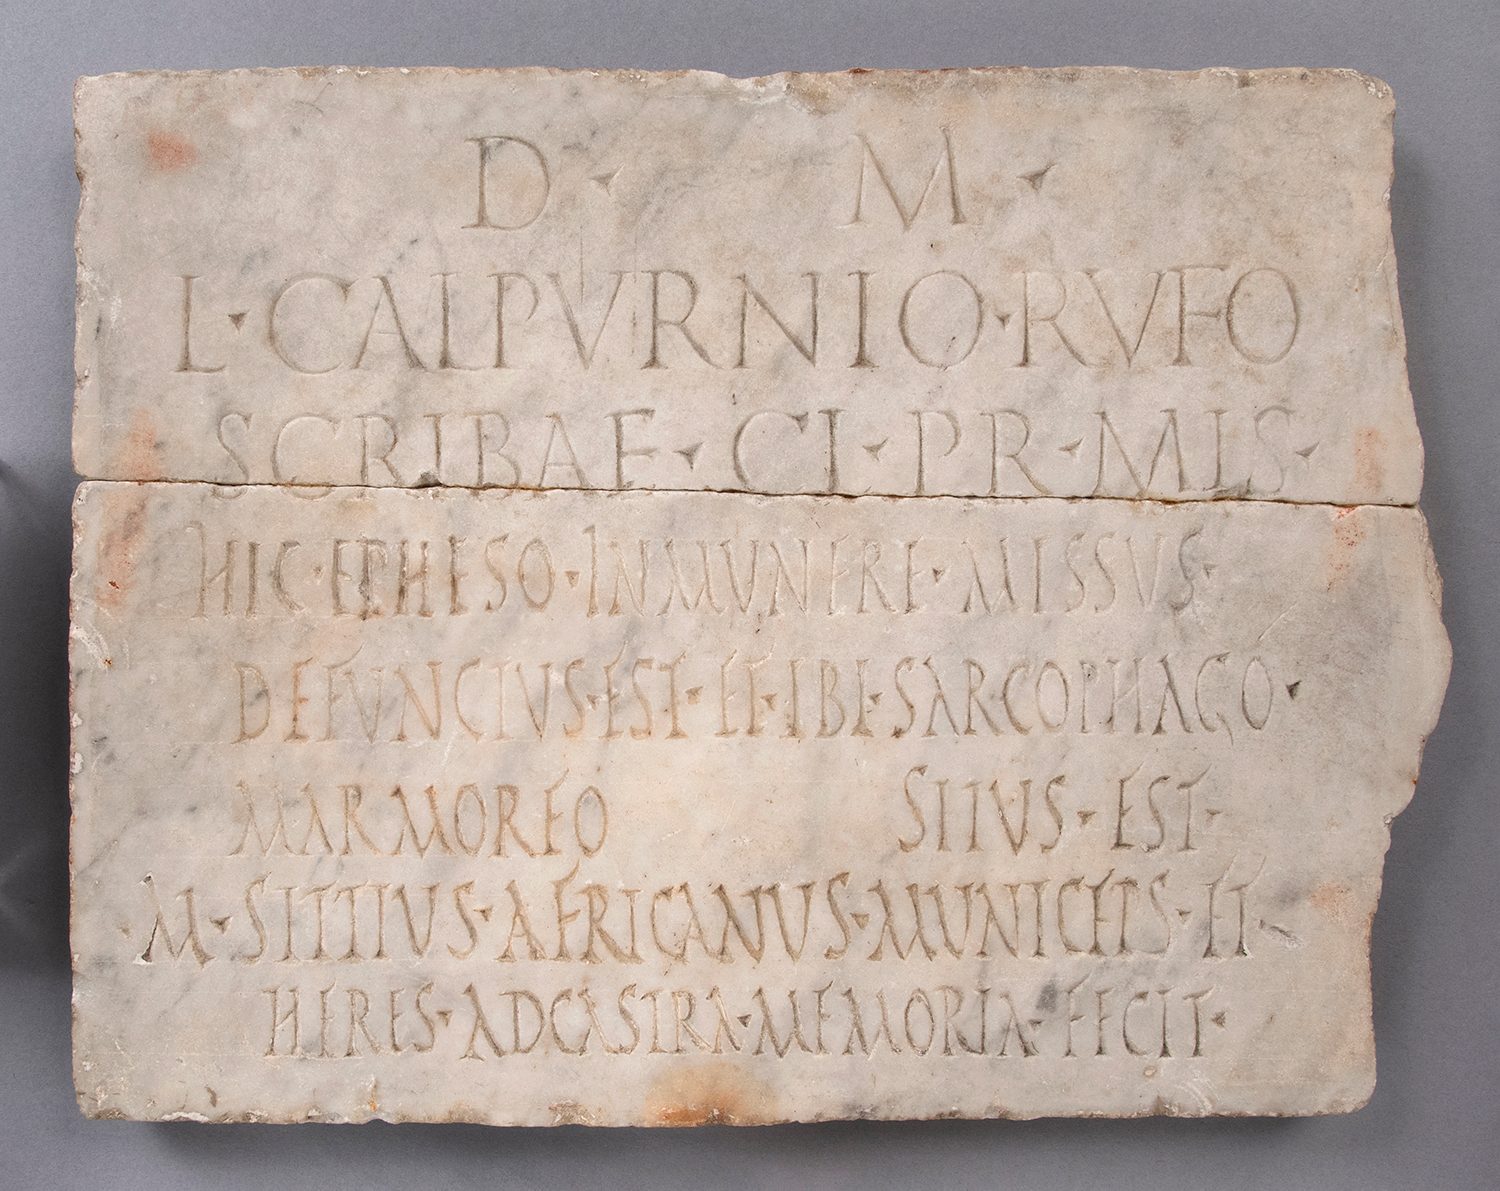 Roughly rectangular slab of white marble with Latin inscriptions.